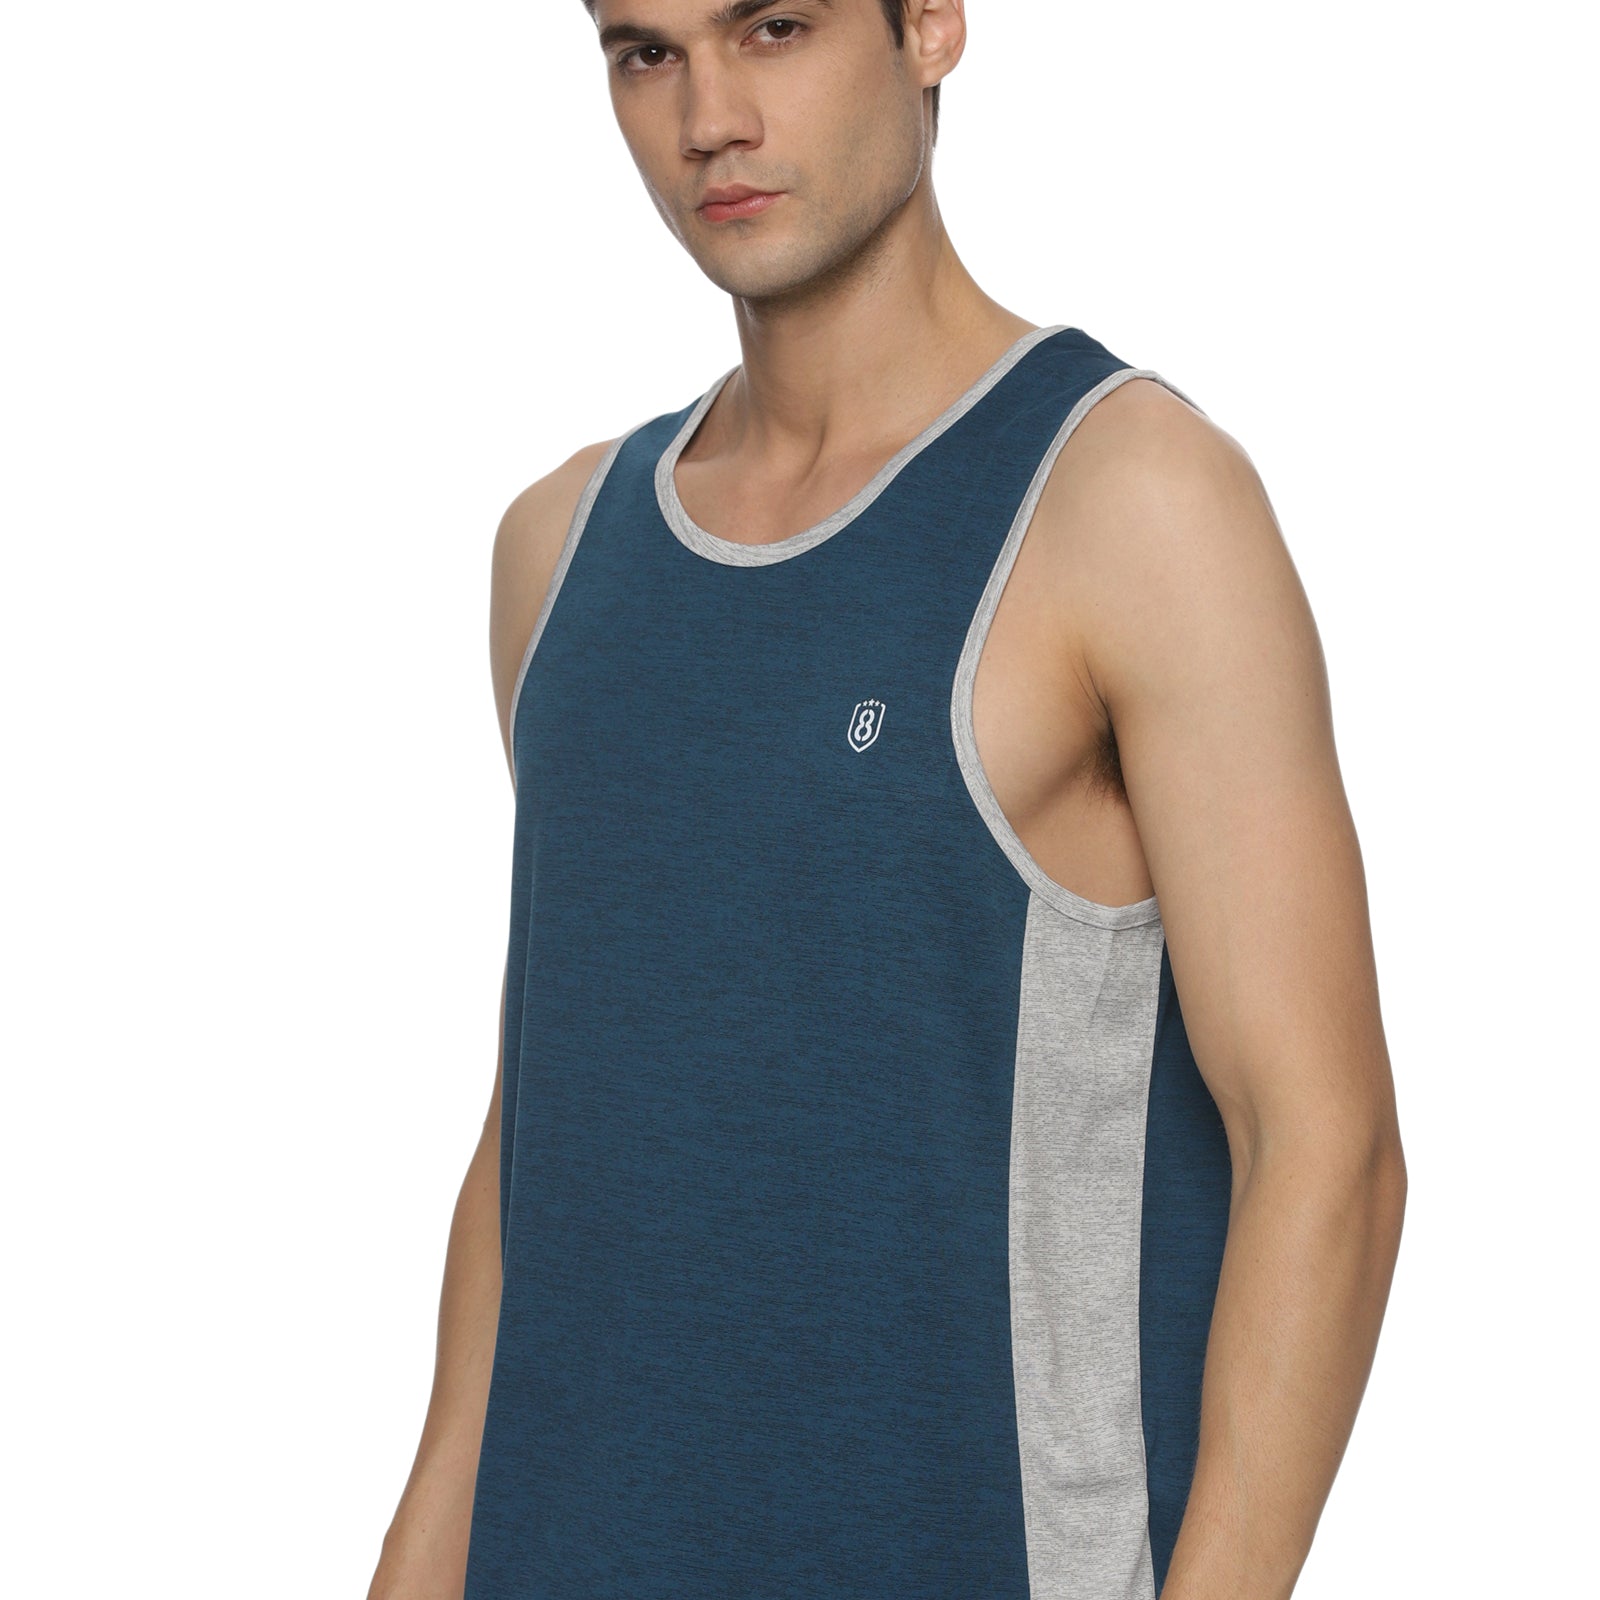 Men Basketball wear with Grey piping.